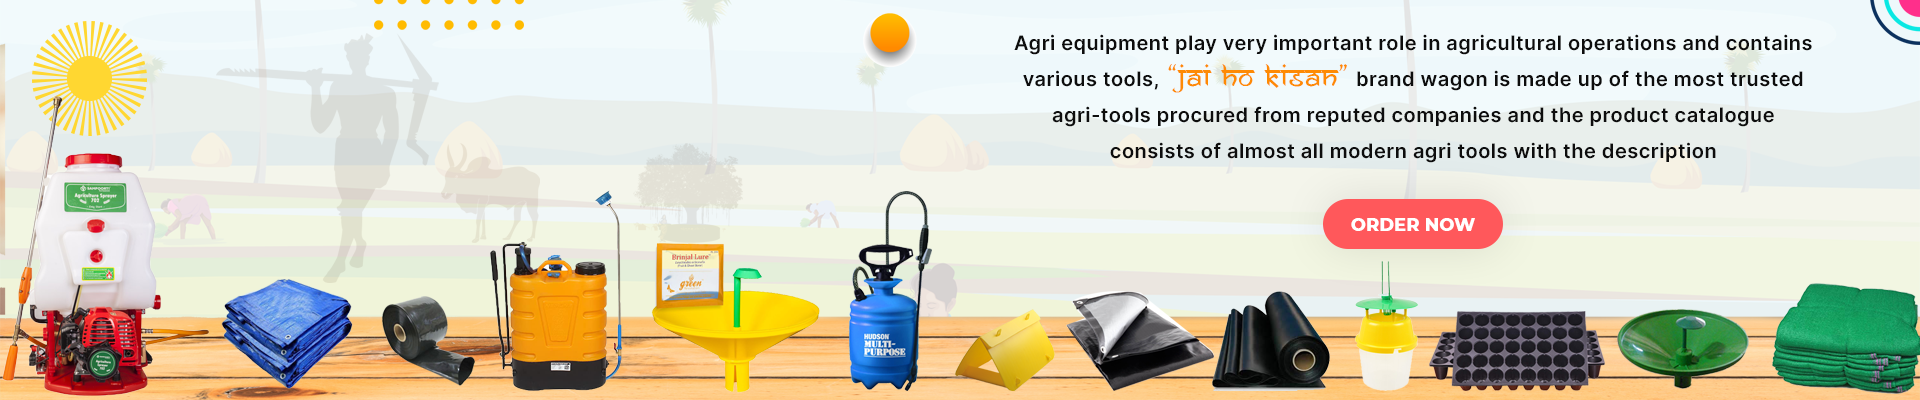 Agriculture Equipment Banner